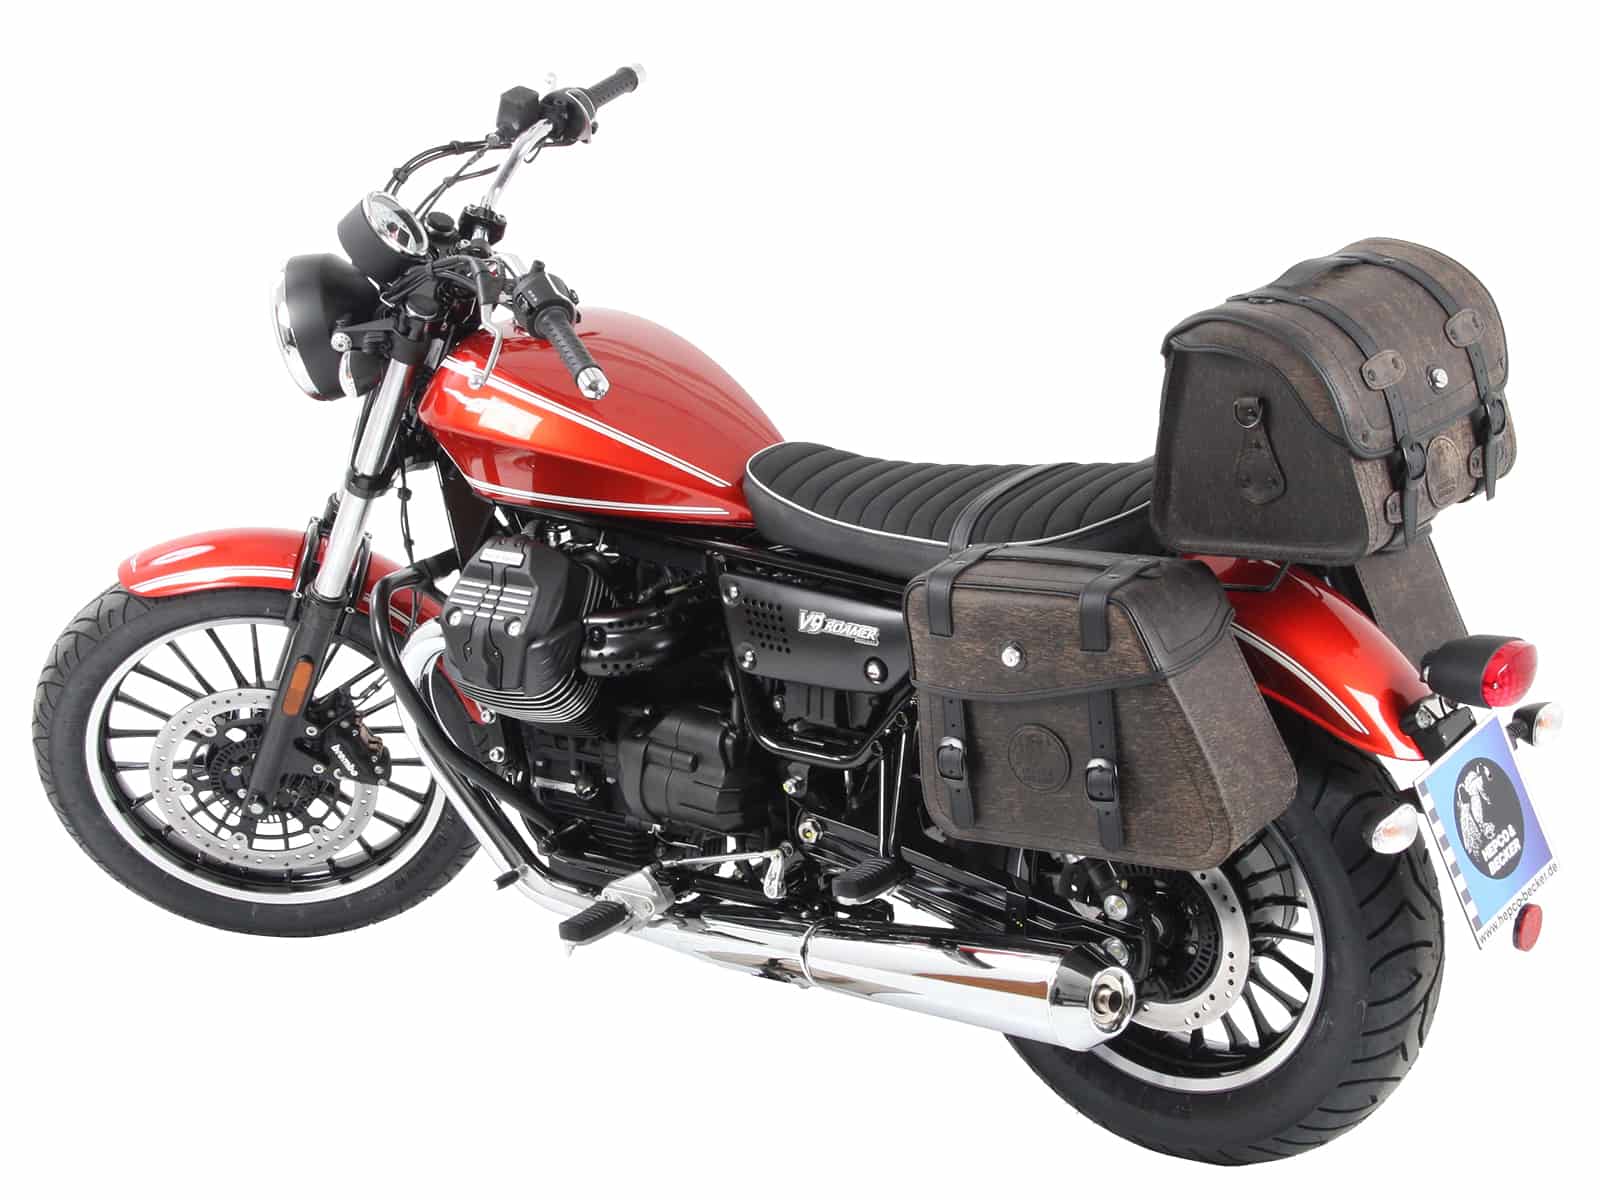 Leatherbag tube carrier Cutout for Moto Guzzi V9 Bobber/Special Edition (2021-)